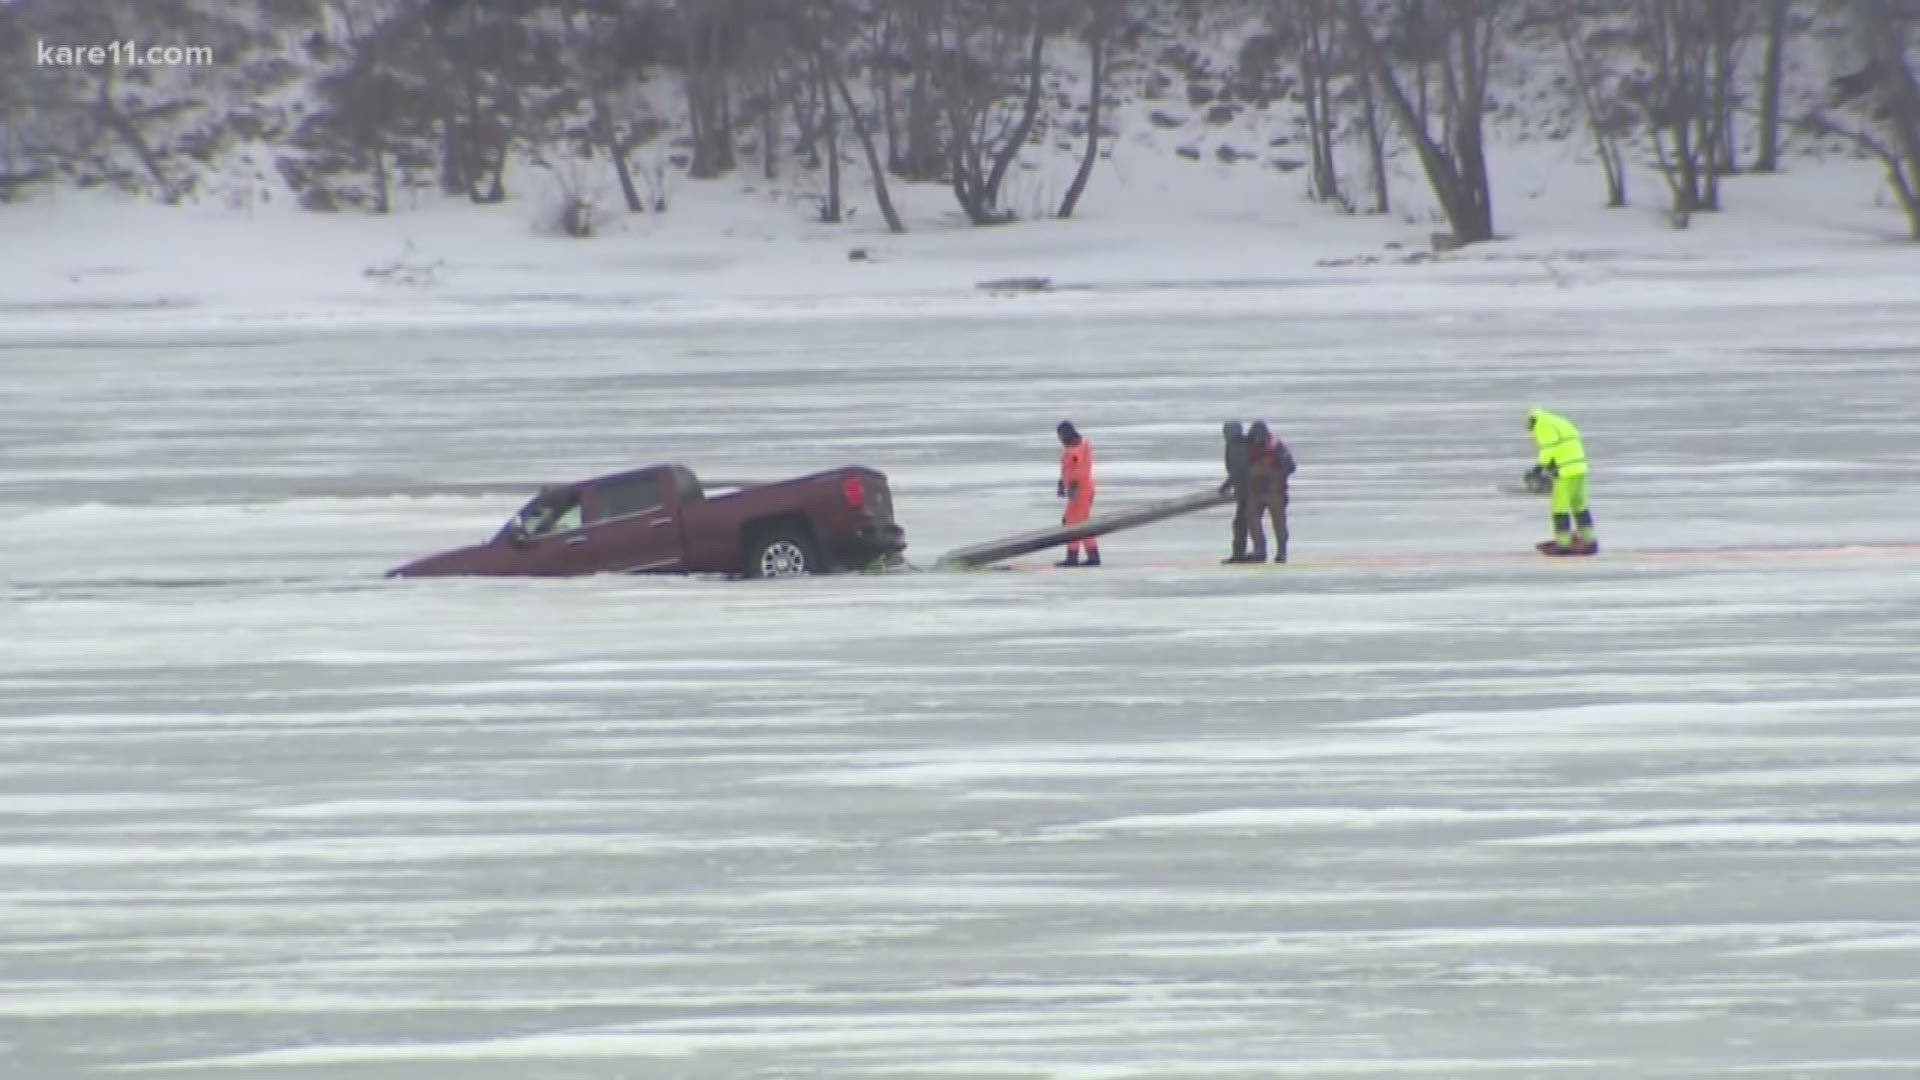 A rescue crew with cold water suits went out onto the ice, entered the water and pulled the driver out of the vehicle with a rescue rope.